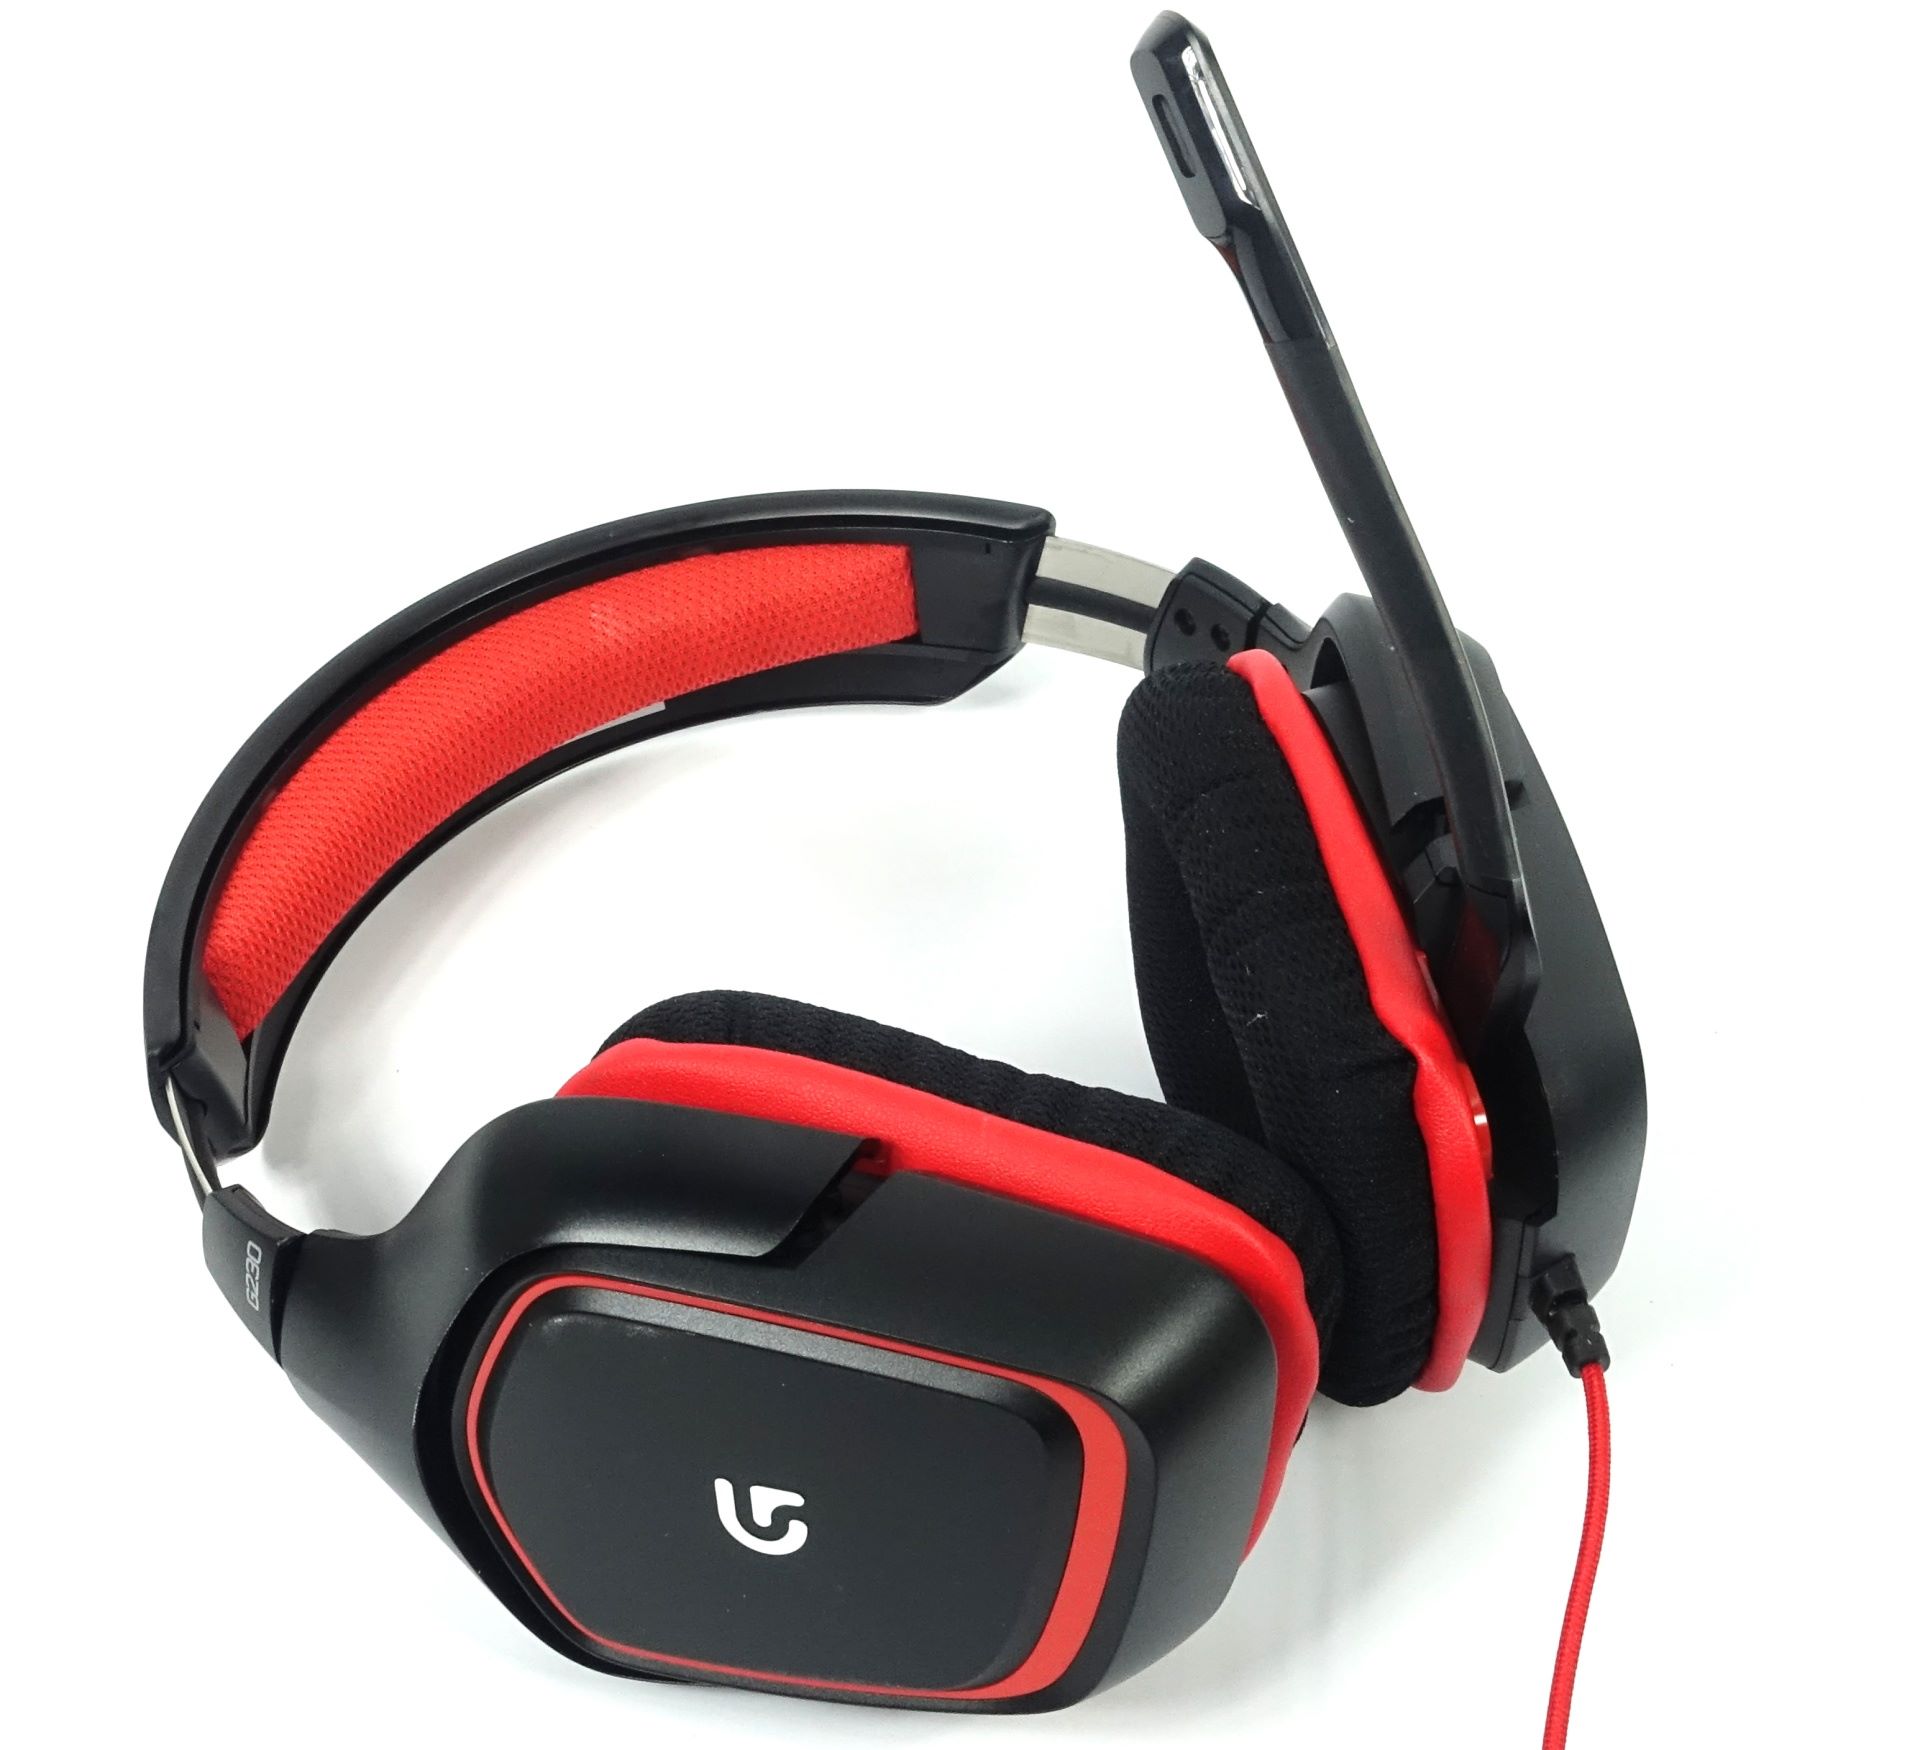 Logitech G230 Stereo Gaming Headset: How To Use With PS4